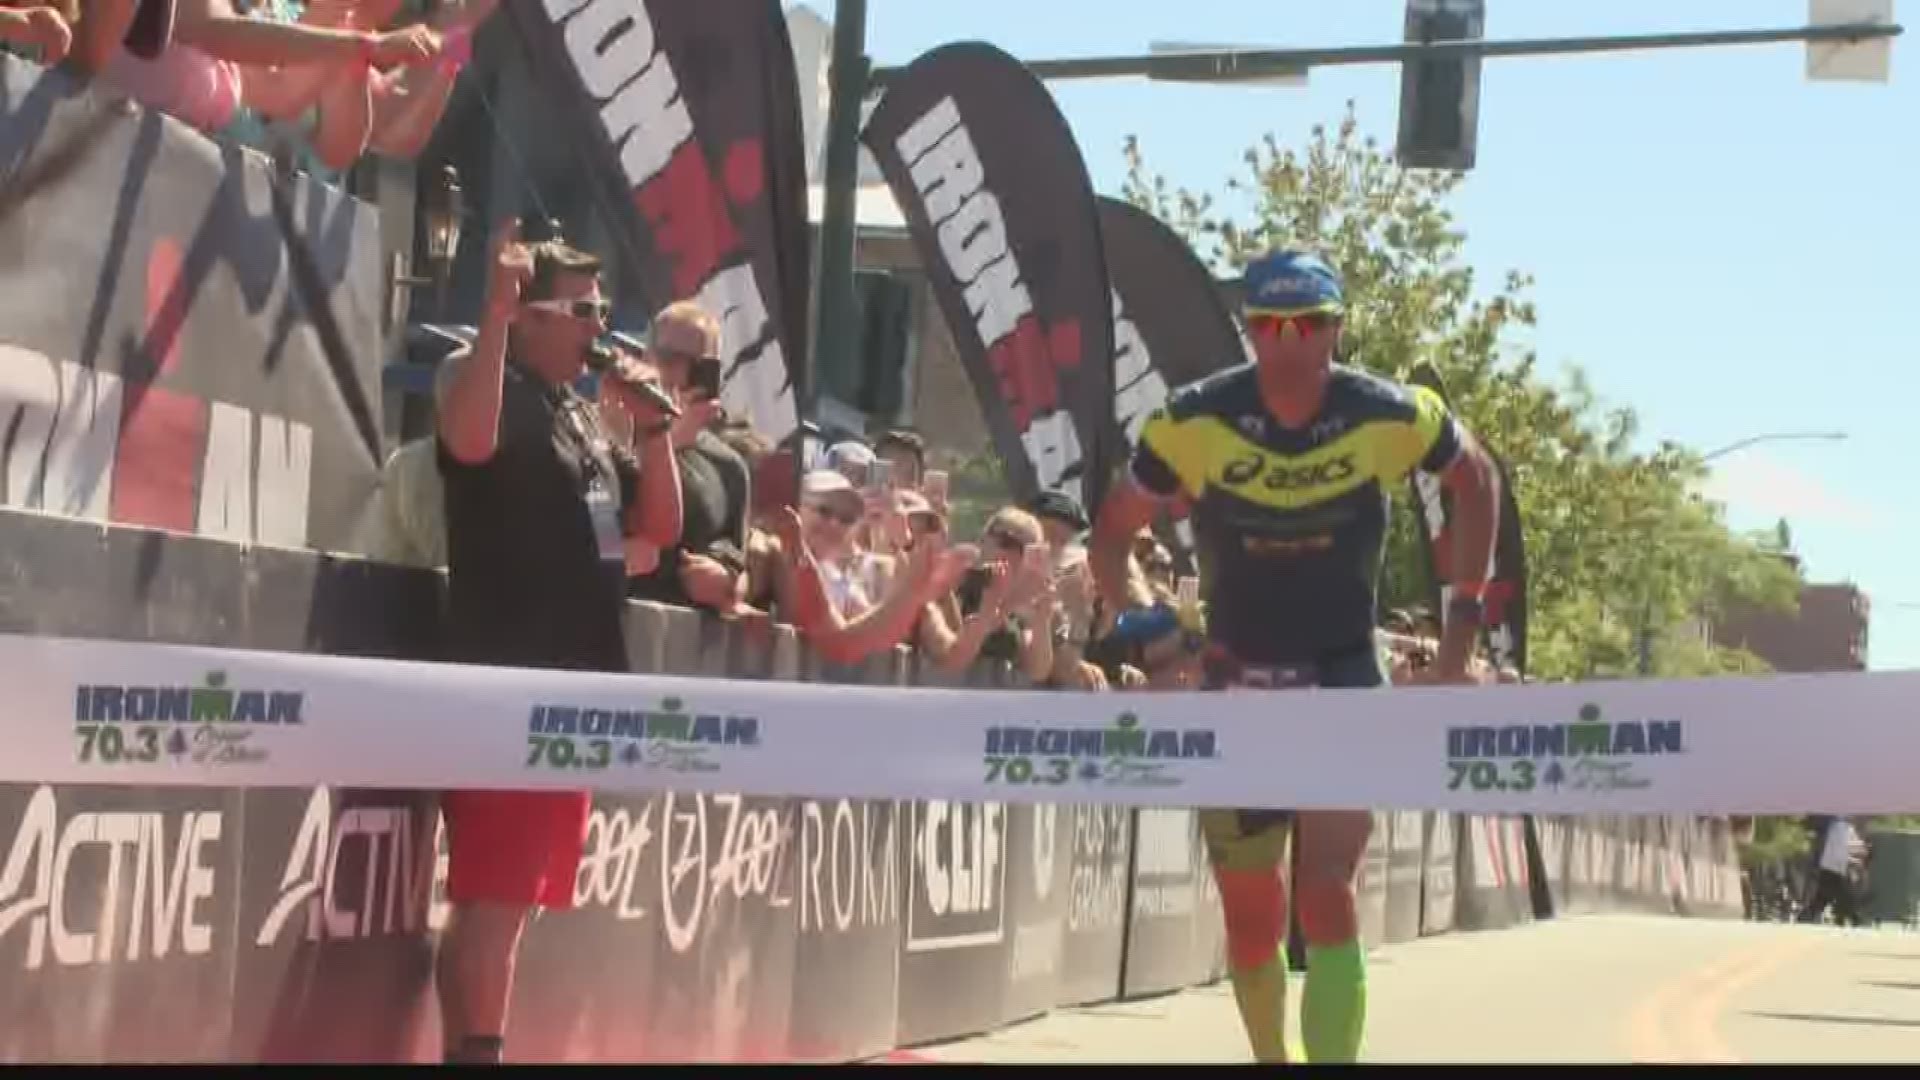 Ironman competitors share 'Inner Mantras'